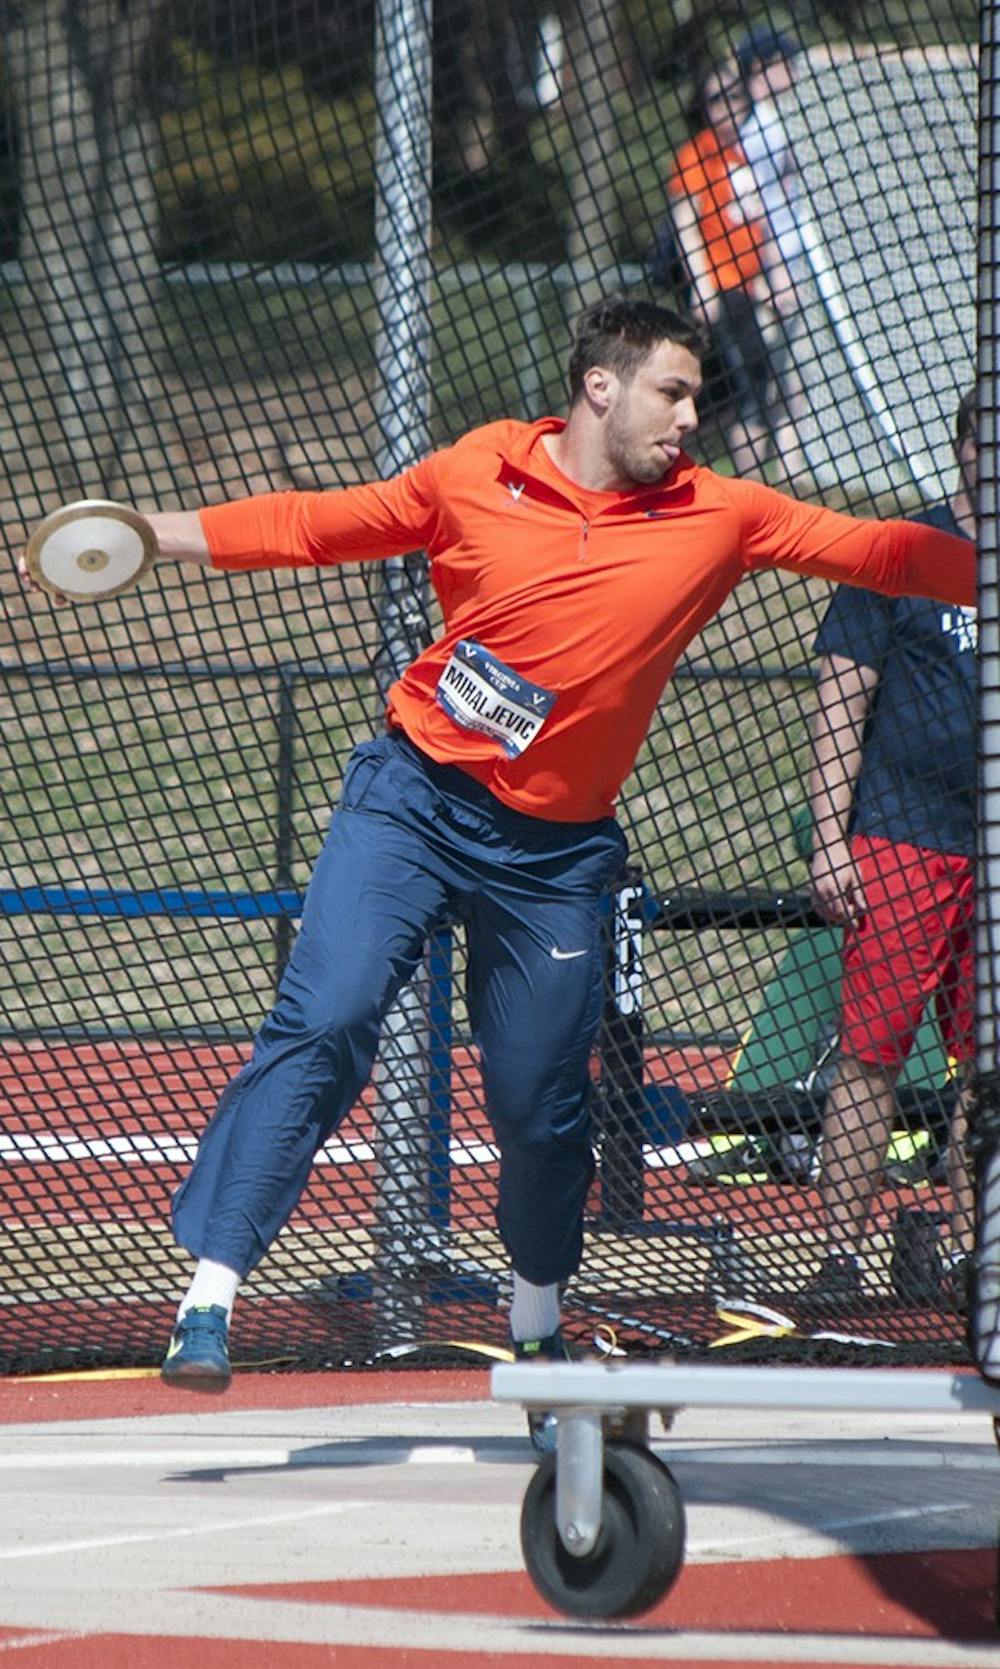 <p>Filip Mihaljevic,&nbsp;the reigning ACC Indoor champion, broke his own conference and school record&nbsp;with a first-place throw of 67’ 10.75”.&nbsp;</p>